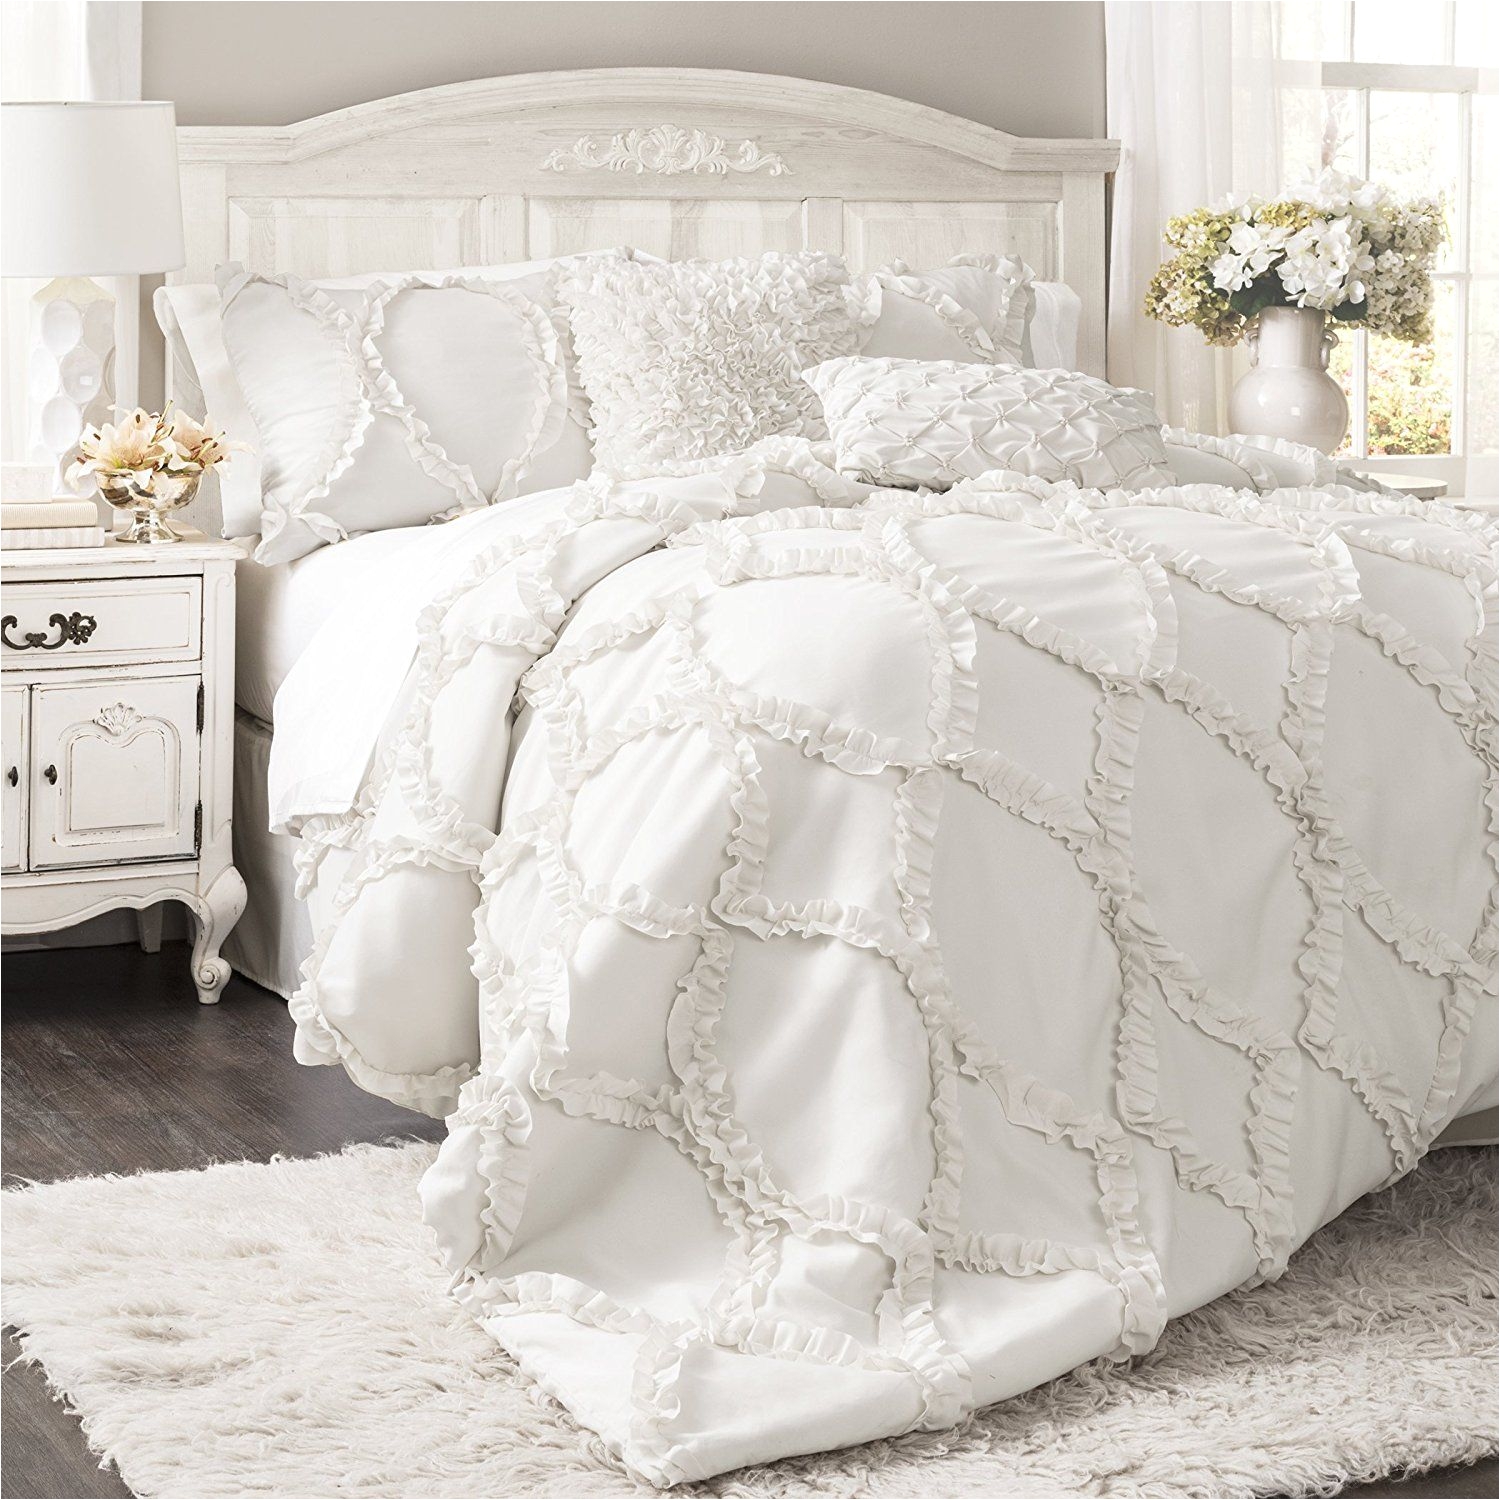 Lush Decor Belle 4-piece Comforter Set Queen White Master Bedroom Chandeliers Ideas and Pictures Master Bedroom